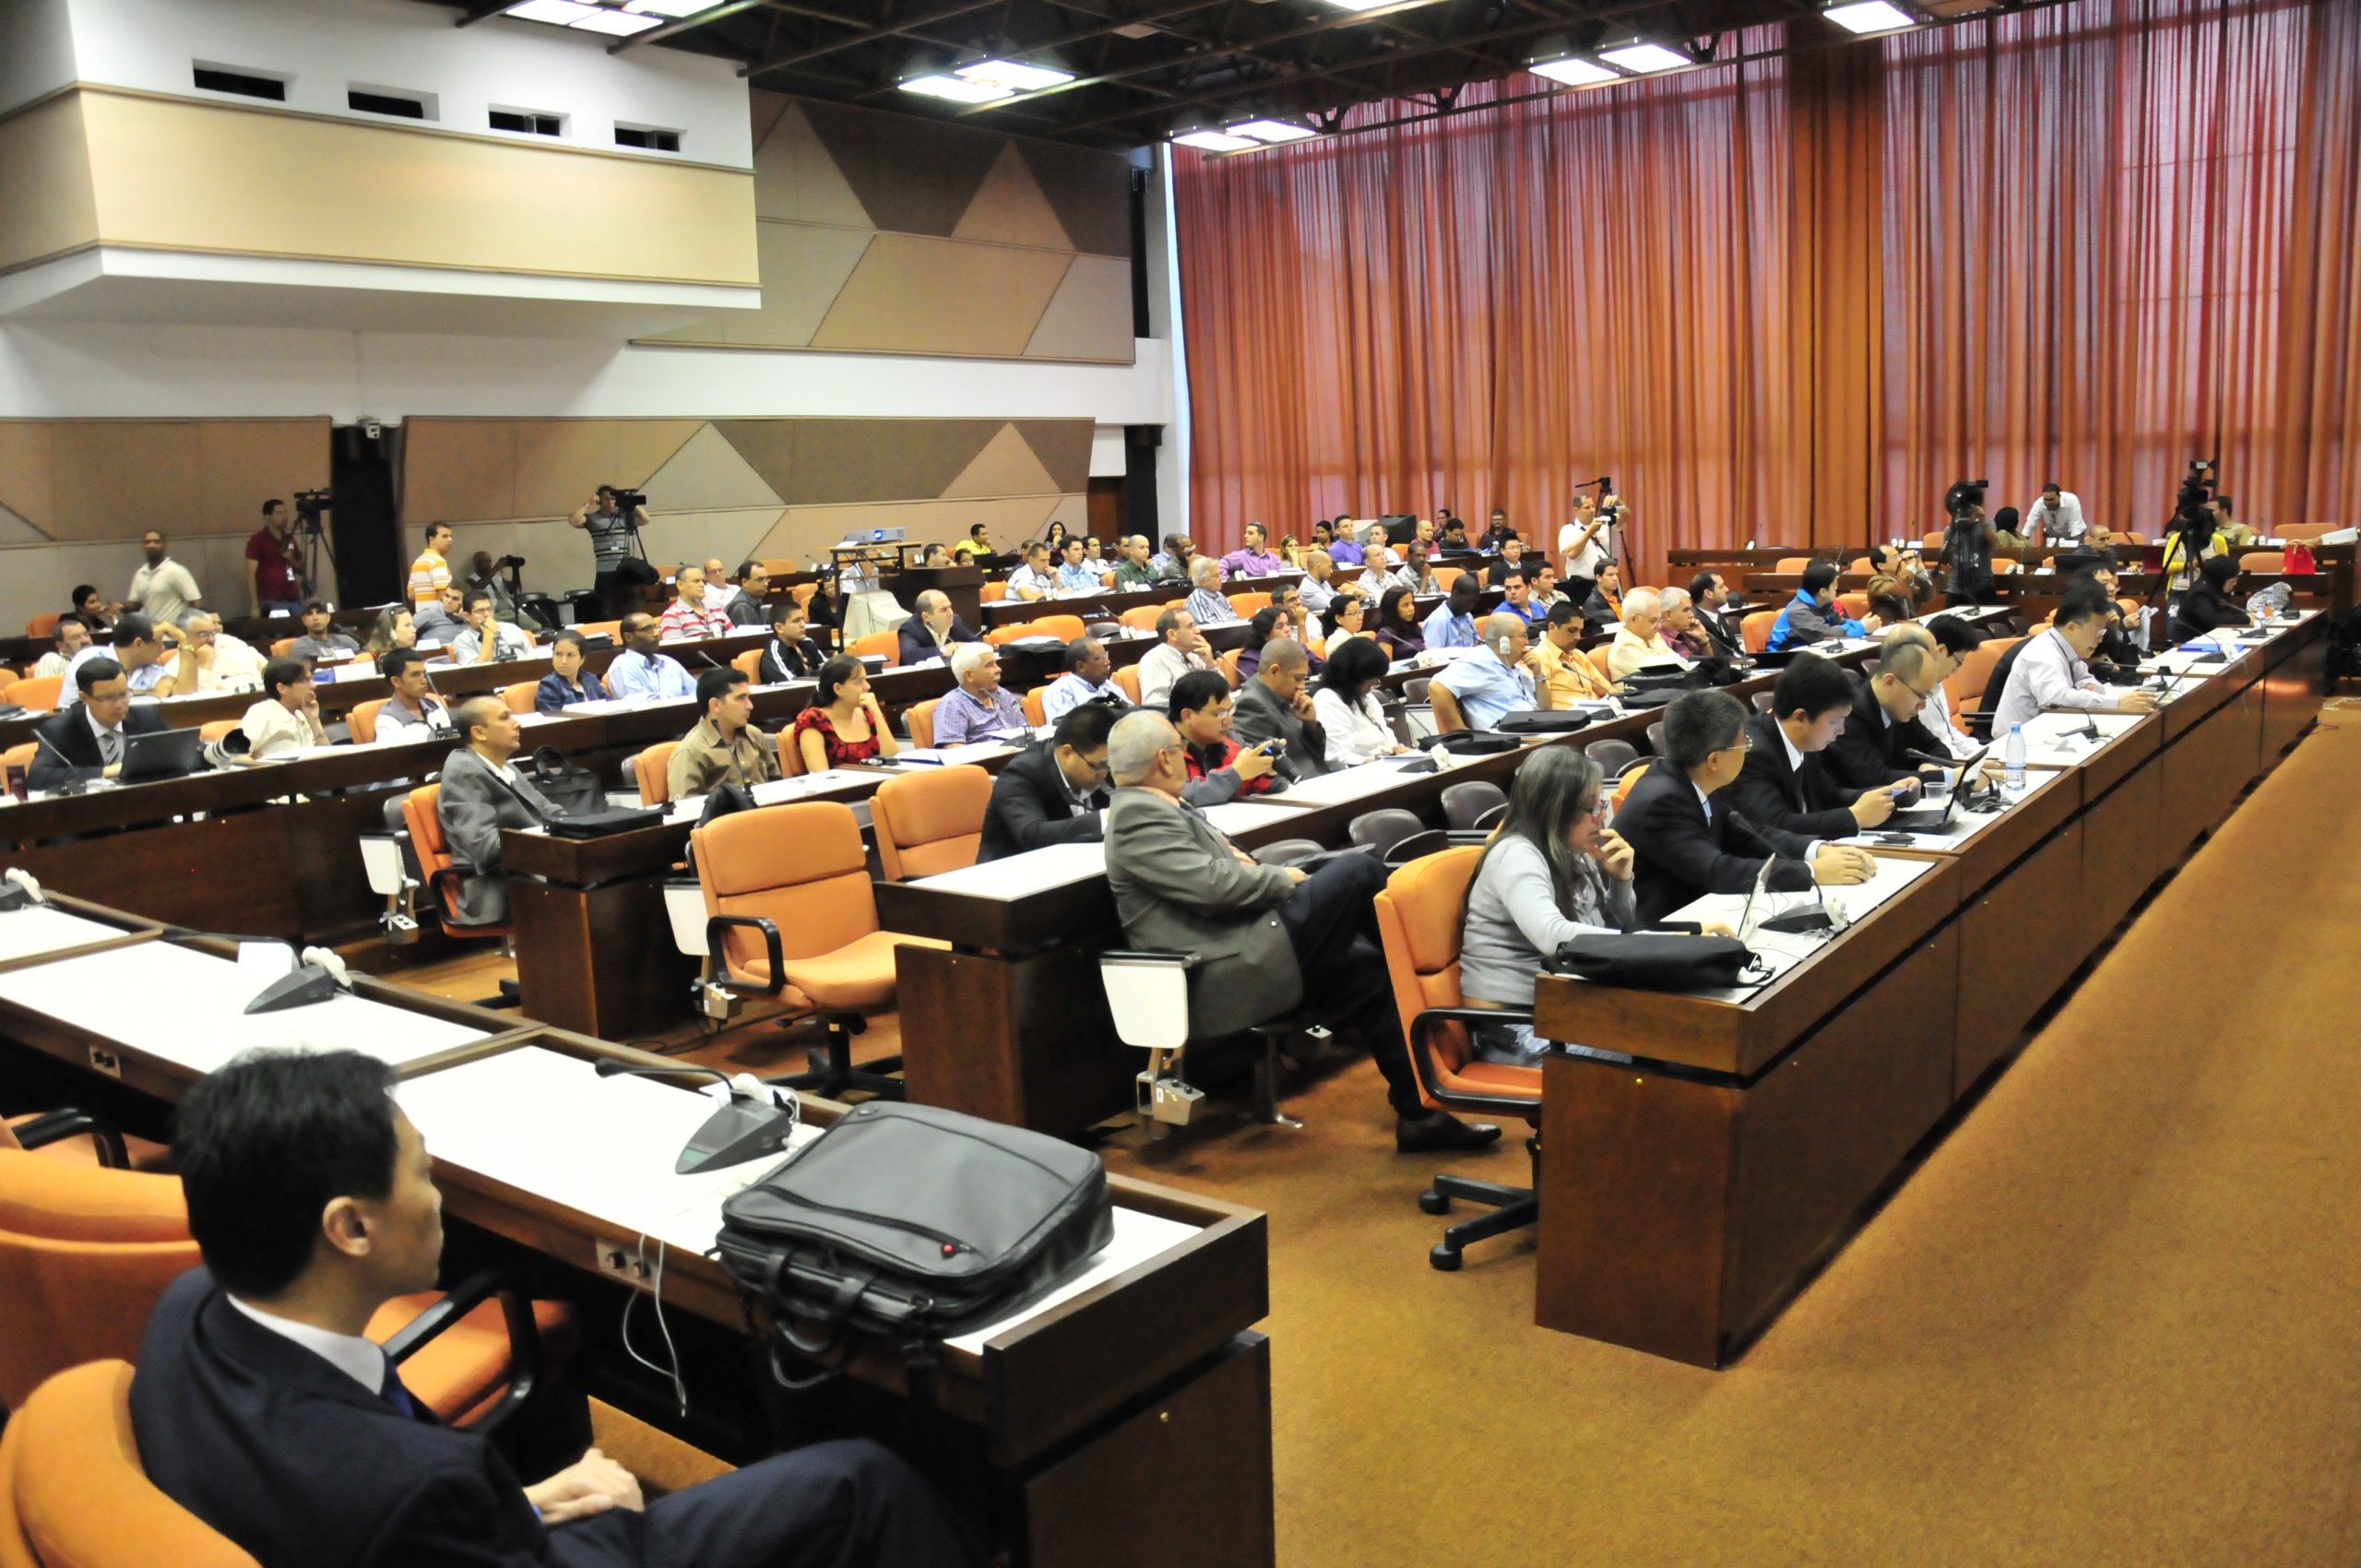 A session of one of the Congresses during INFORMÁTICA 2013 